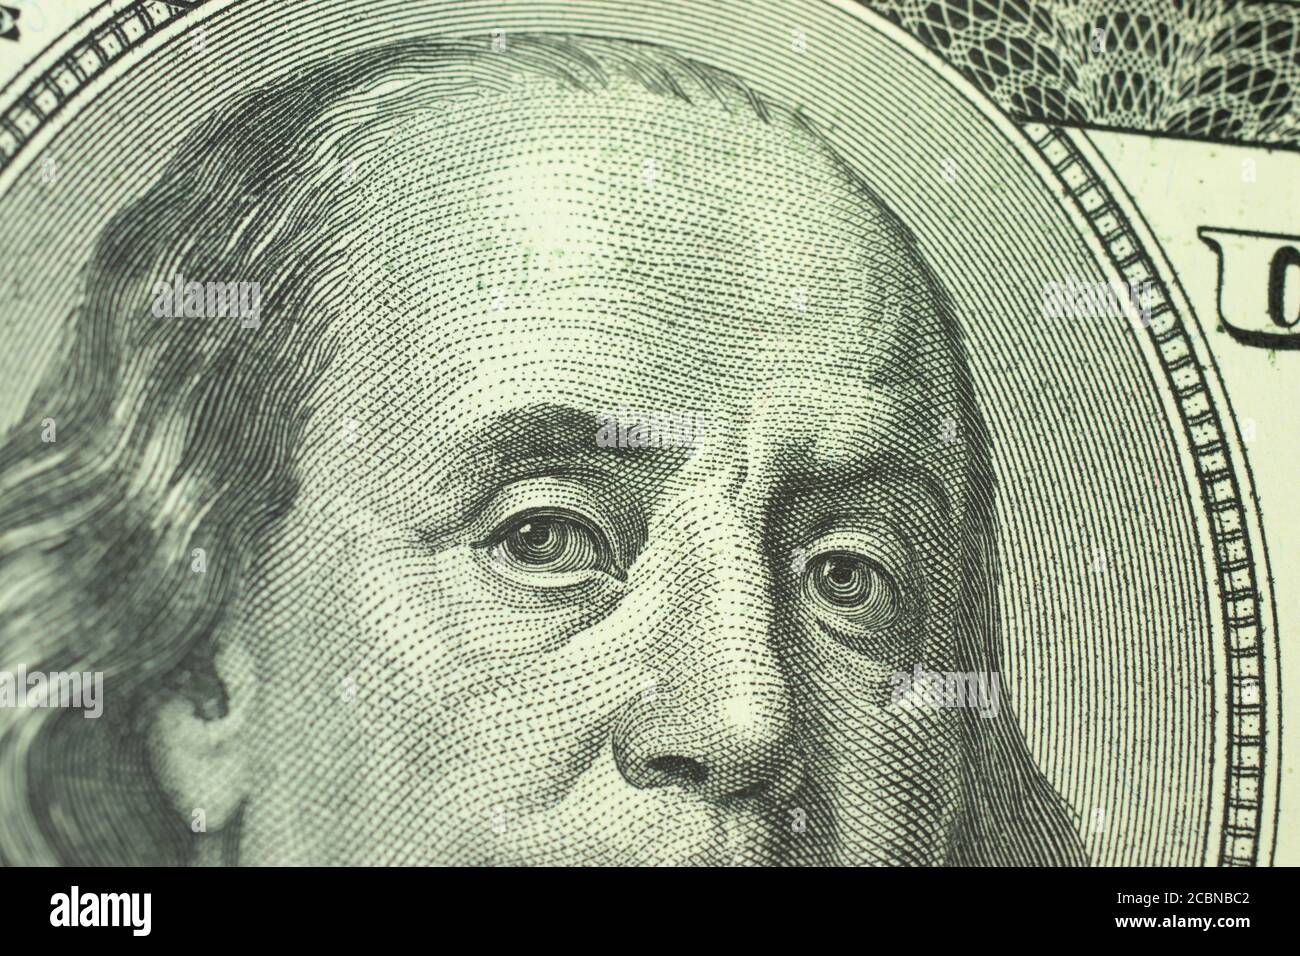 Franklin macro photo on one hundred dollars banknote close-up Stock Photo